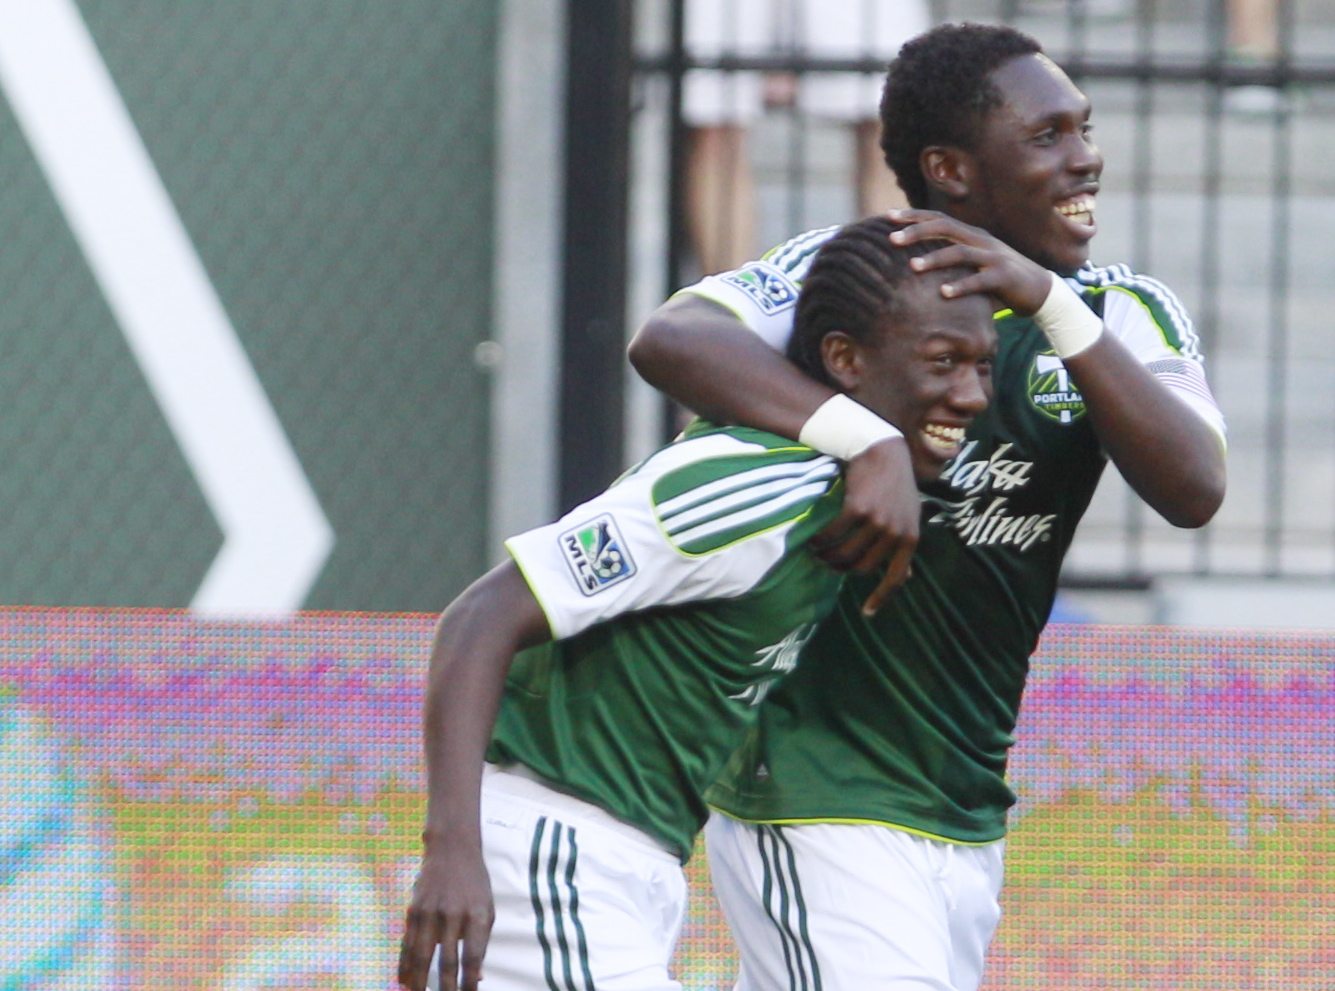 Portland Timbers' midfielder Diego Chara, left, is hugged by teammate Portland Timbers' Kalif Alhassan, right, after scoring during the first half Saturday.